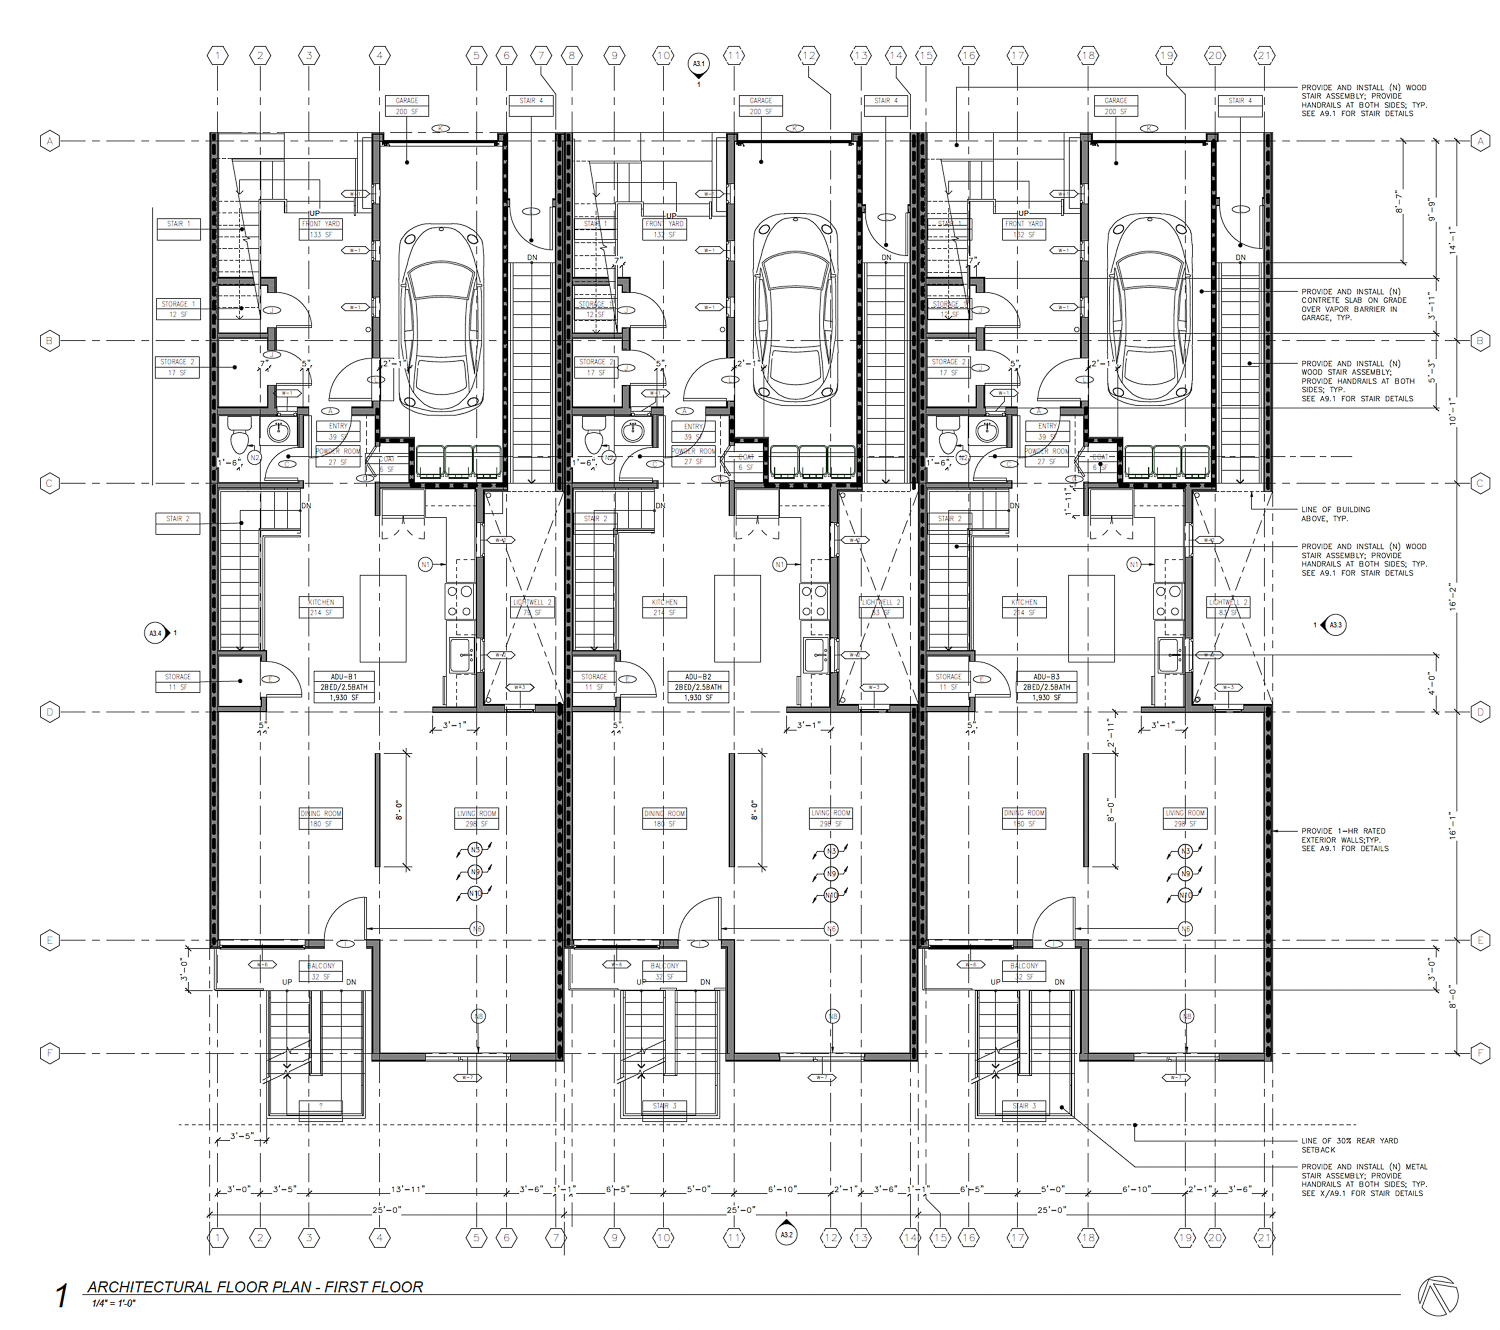 1039 Hudson Avenue, floor plan by Syncopated Architecture